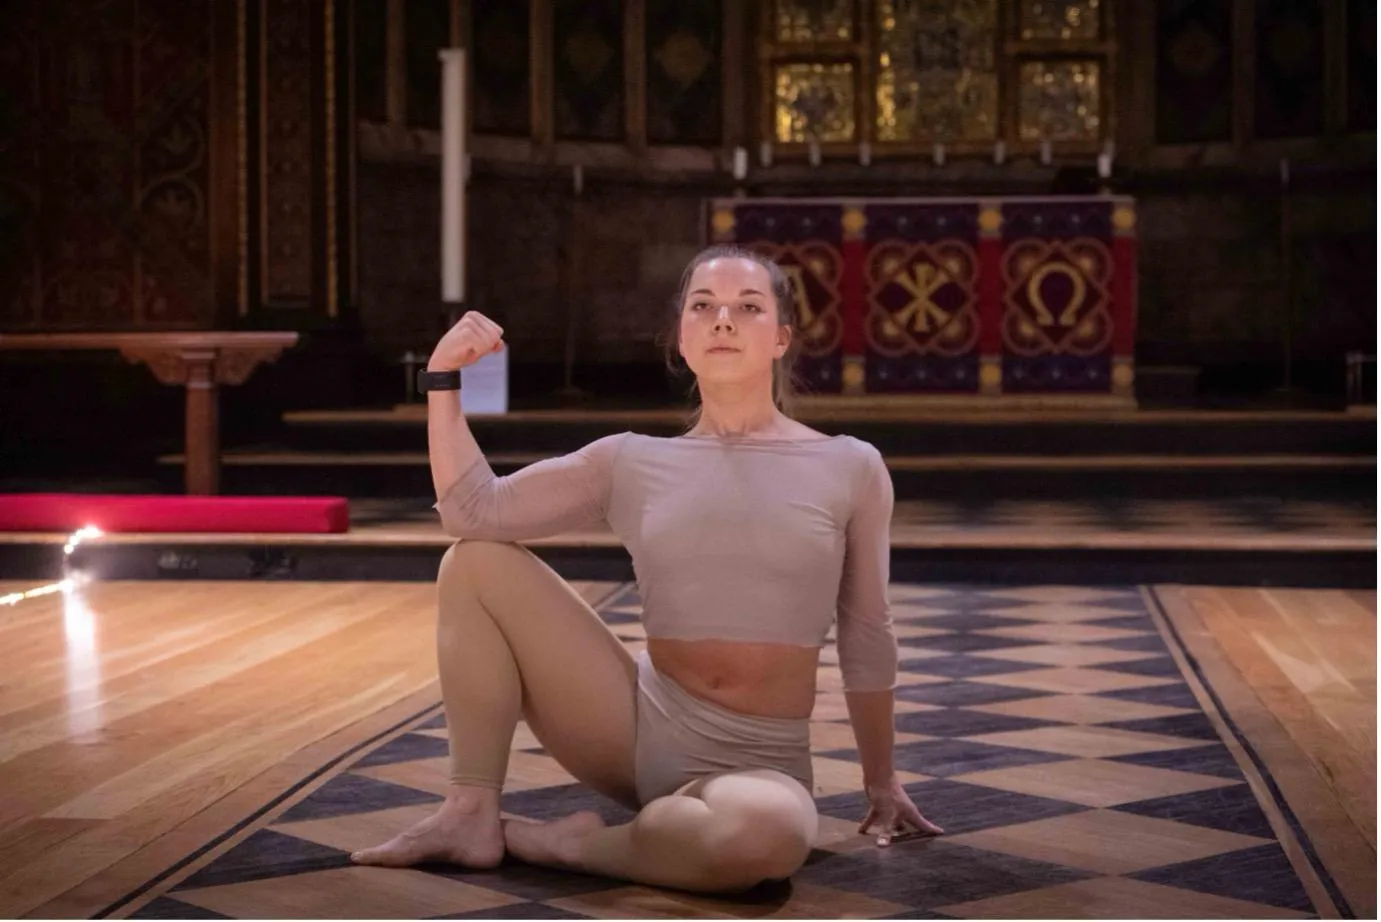 Feedback Loops performance in the King’s Chapel, dancer Anna Spink. Image: Nathan Clarke Photography